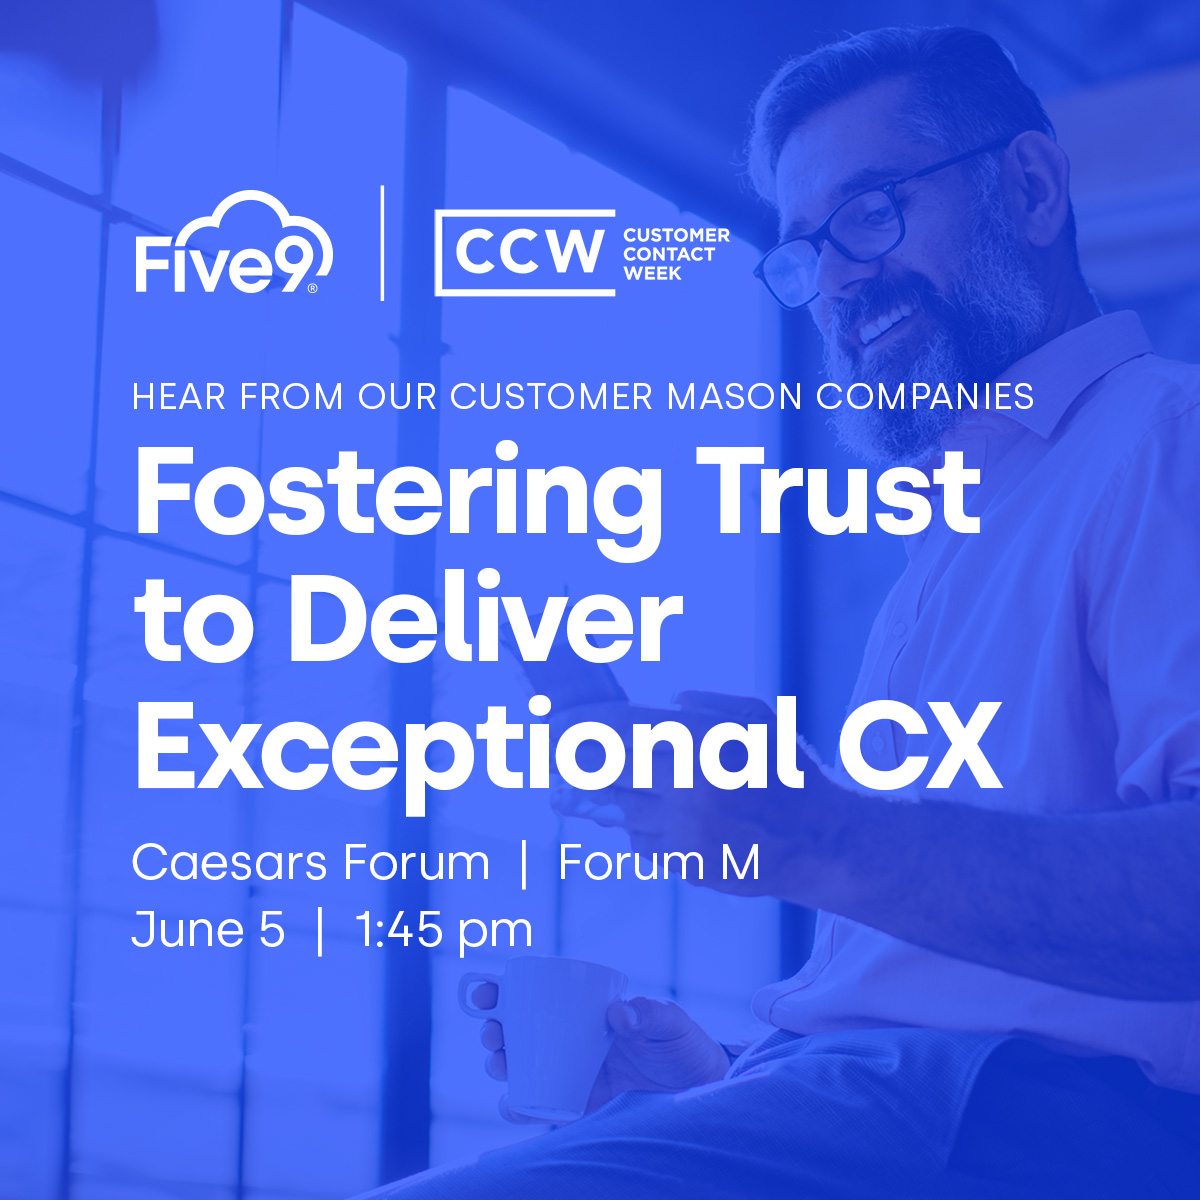 Are you ready to foster trust & deliver exceptional #CX? Join Five9 customer @mason_companies at #CCWVegas as we will explore cultivating trust & great #CX, serving a diverse population of customers, & more. See you there ➡️ spr.ly/6015ejqqx @CustContactWeek